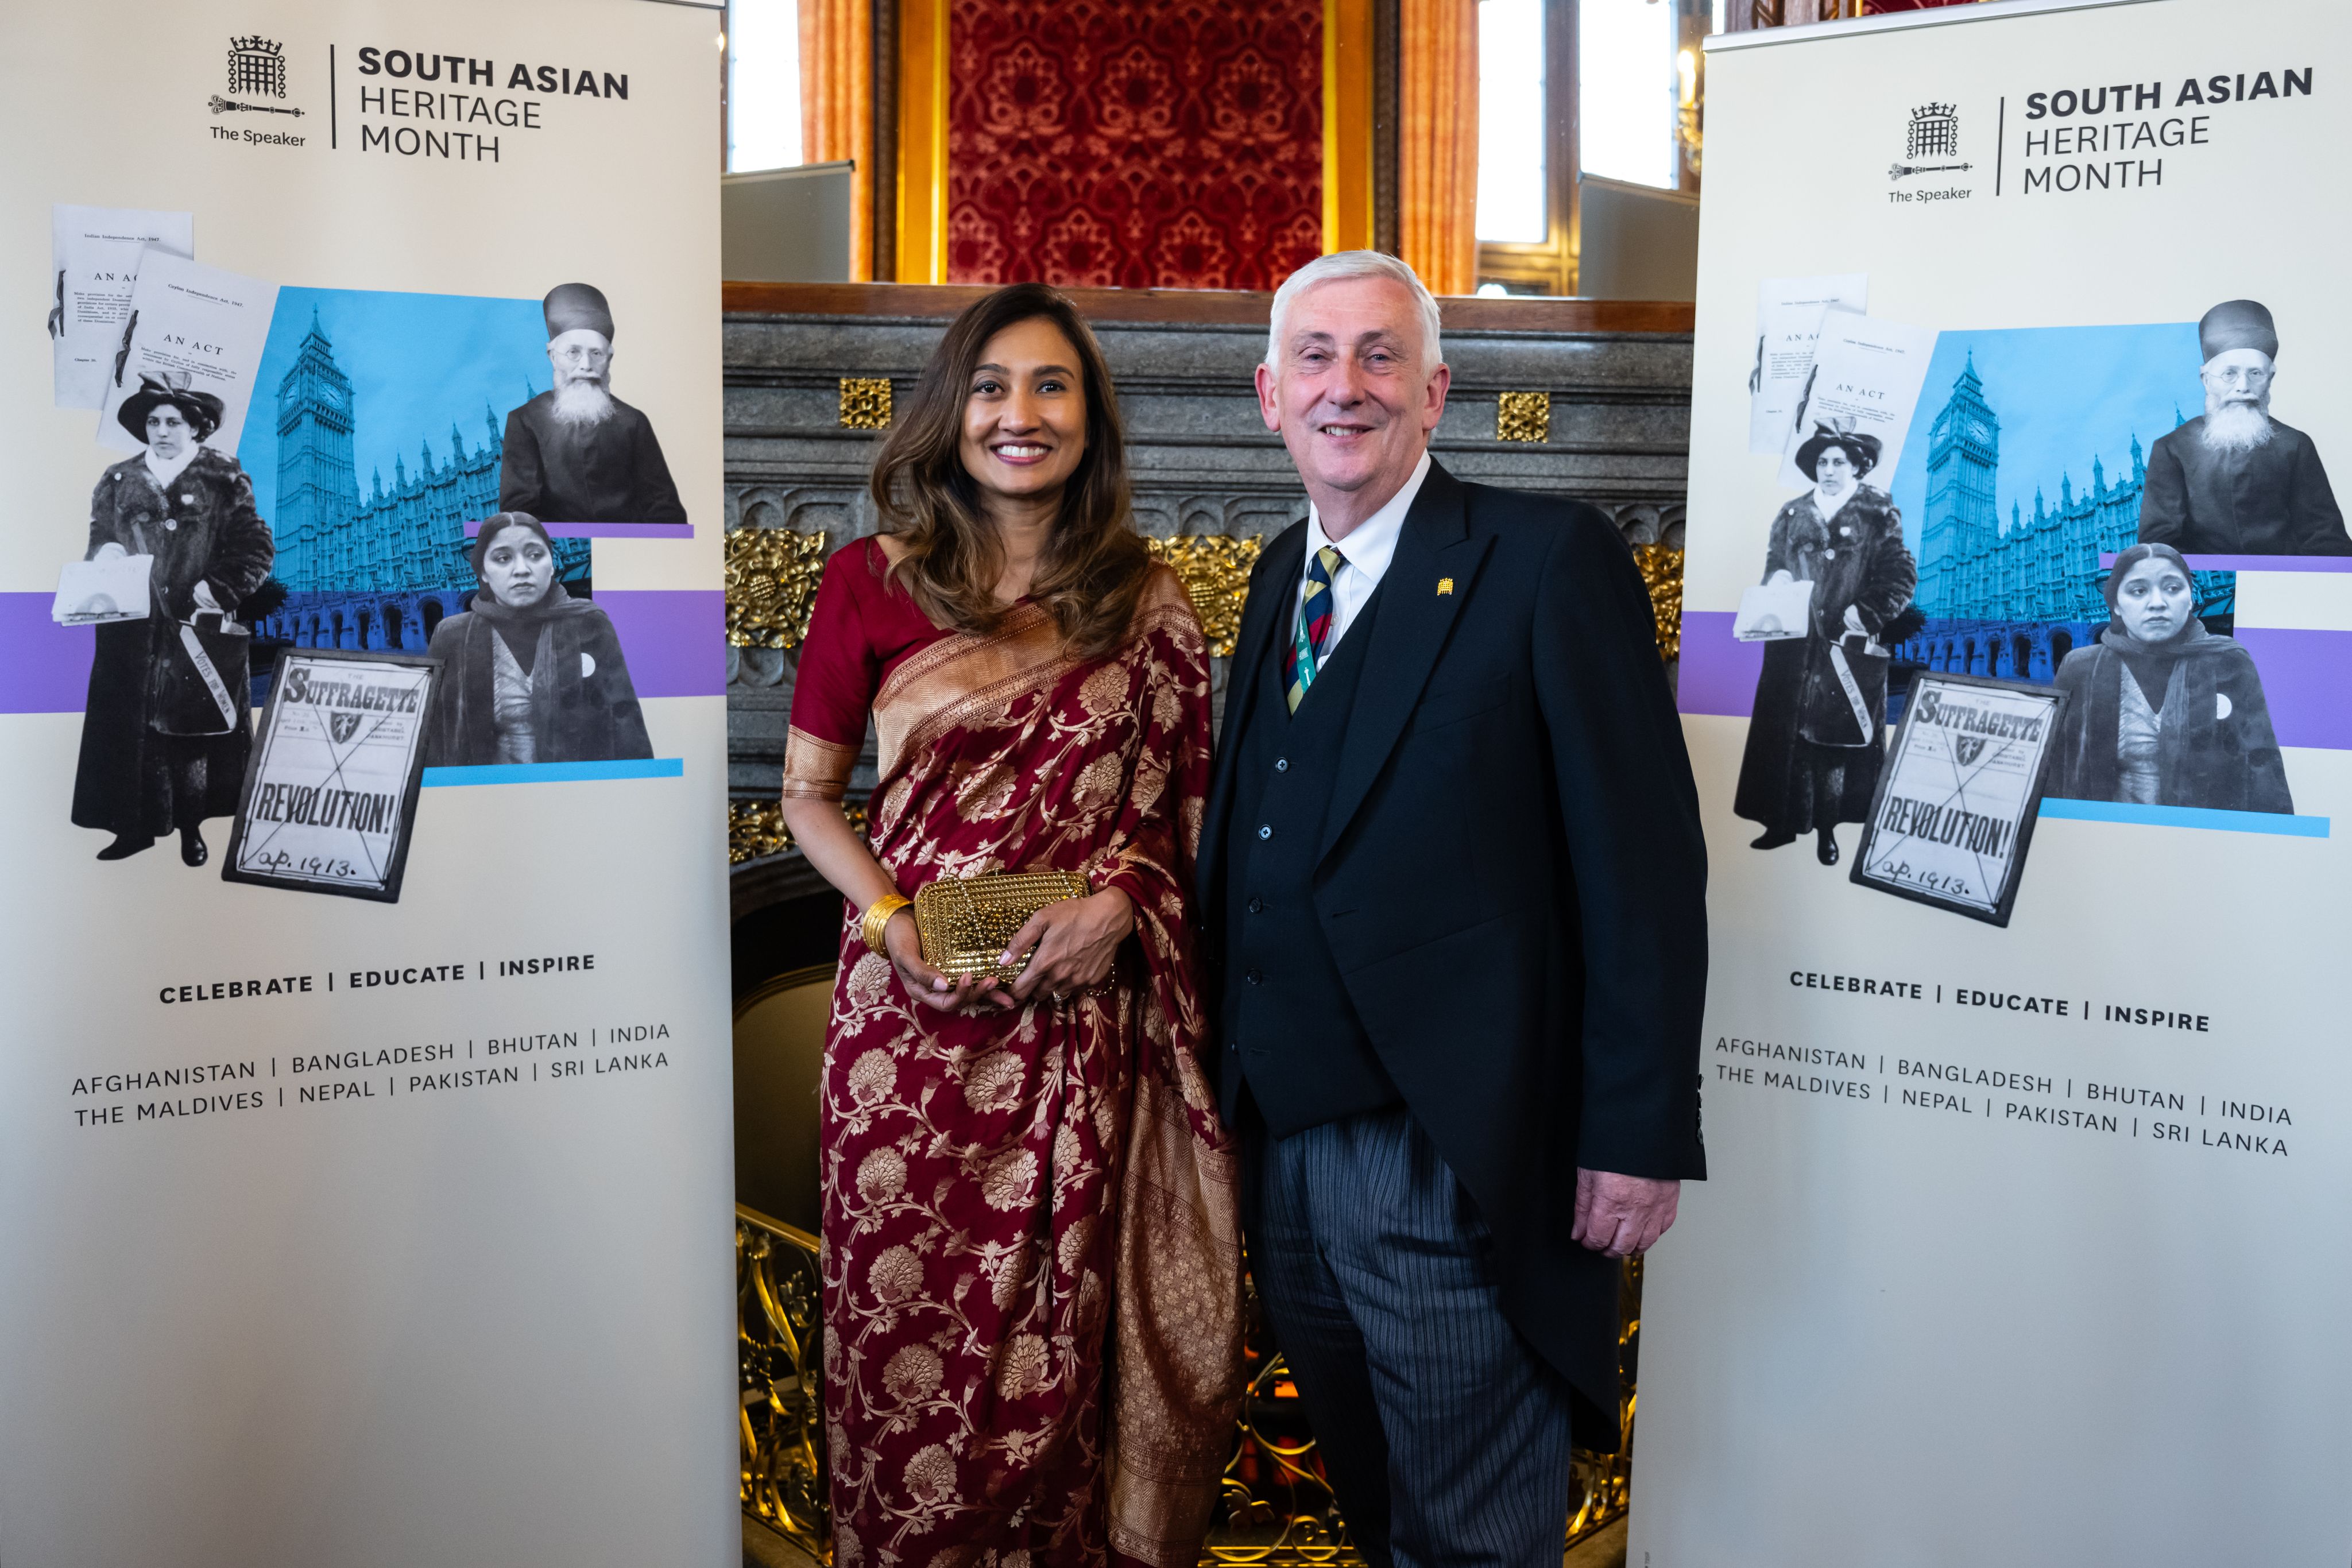 Mr Speaker's South Asian Heritage Month reception